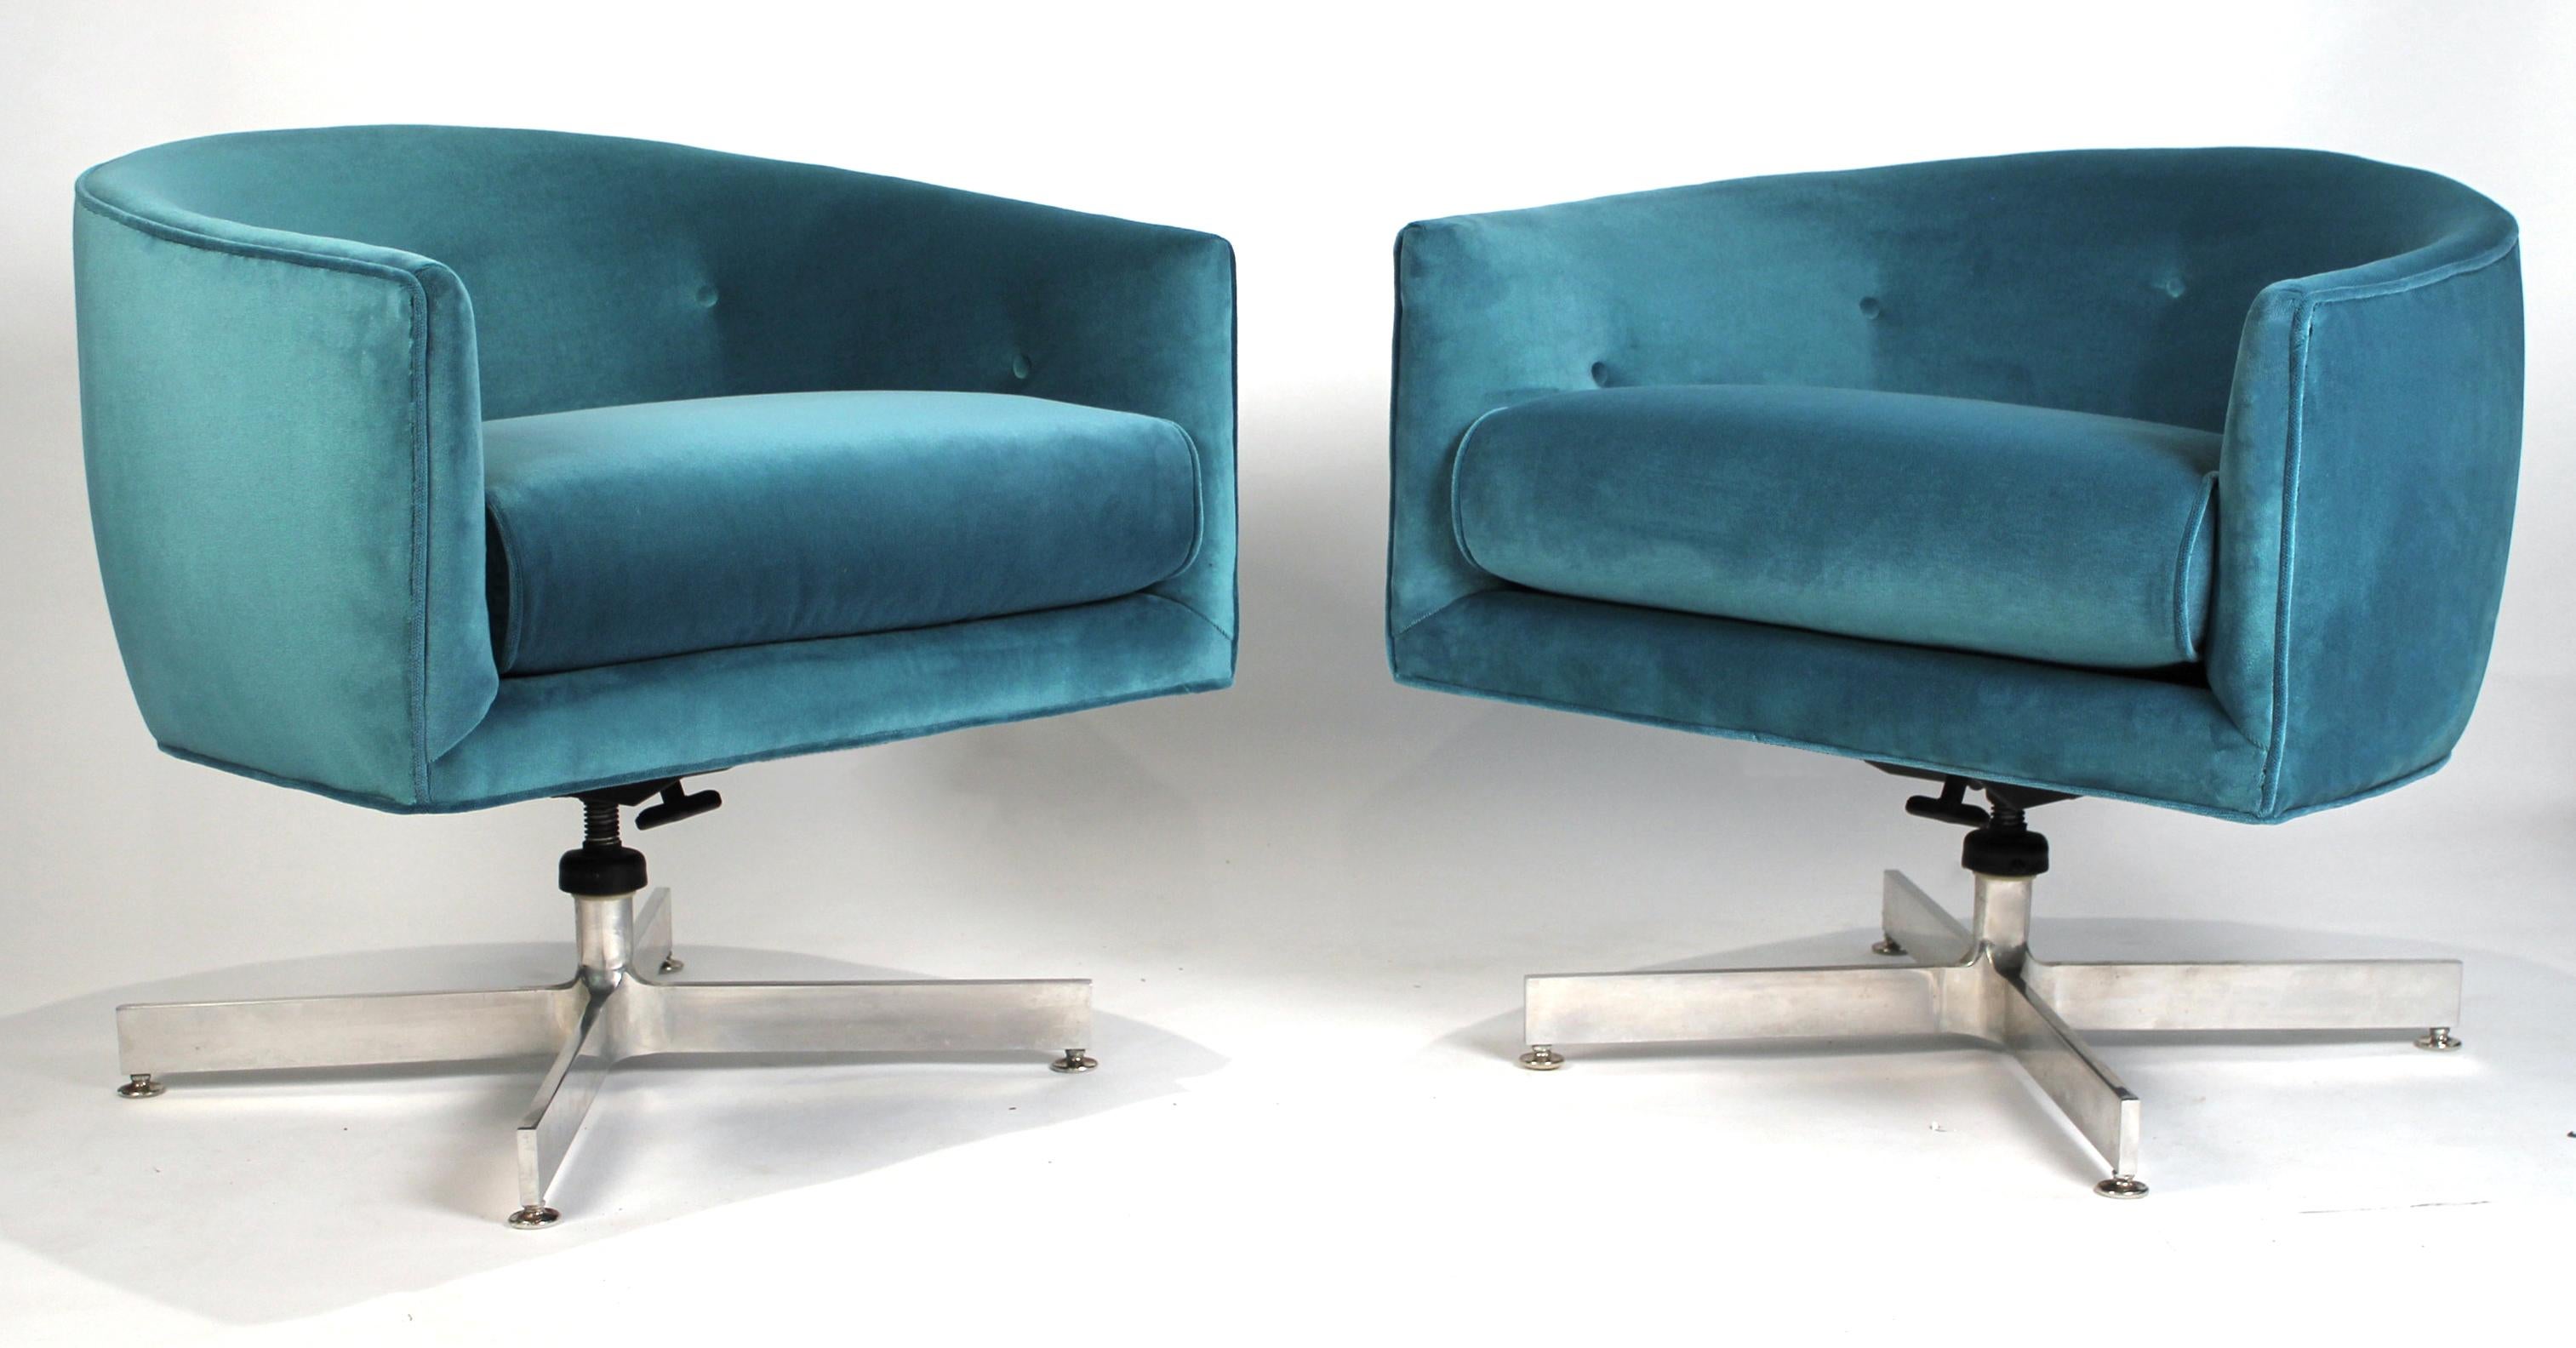 Milo Baughman tilt and swivel lounge chairs for Thayer Coggin fully restored with new webbing, foam and aquamarine velvet from Perennials. The Institutional line was crafted from better materials than the residential grade Thayer Coggin line. The